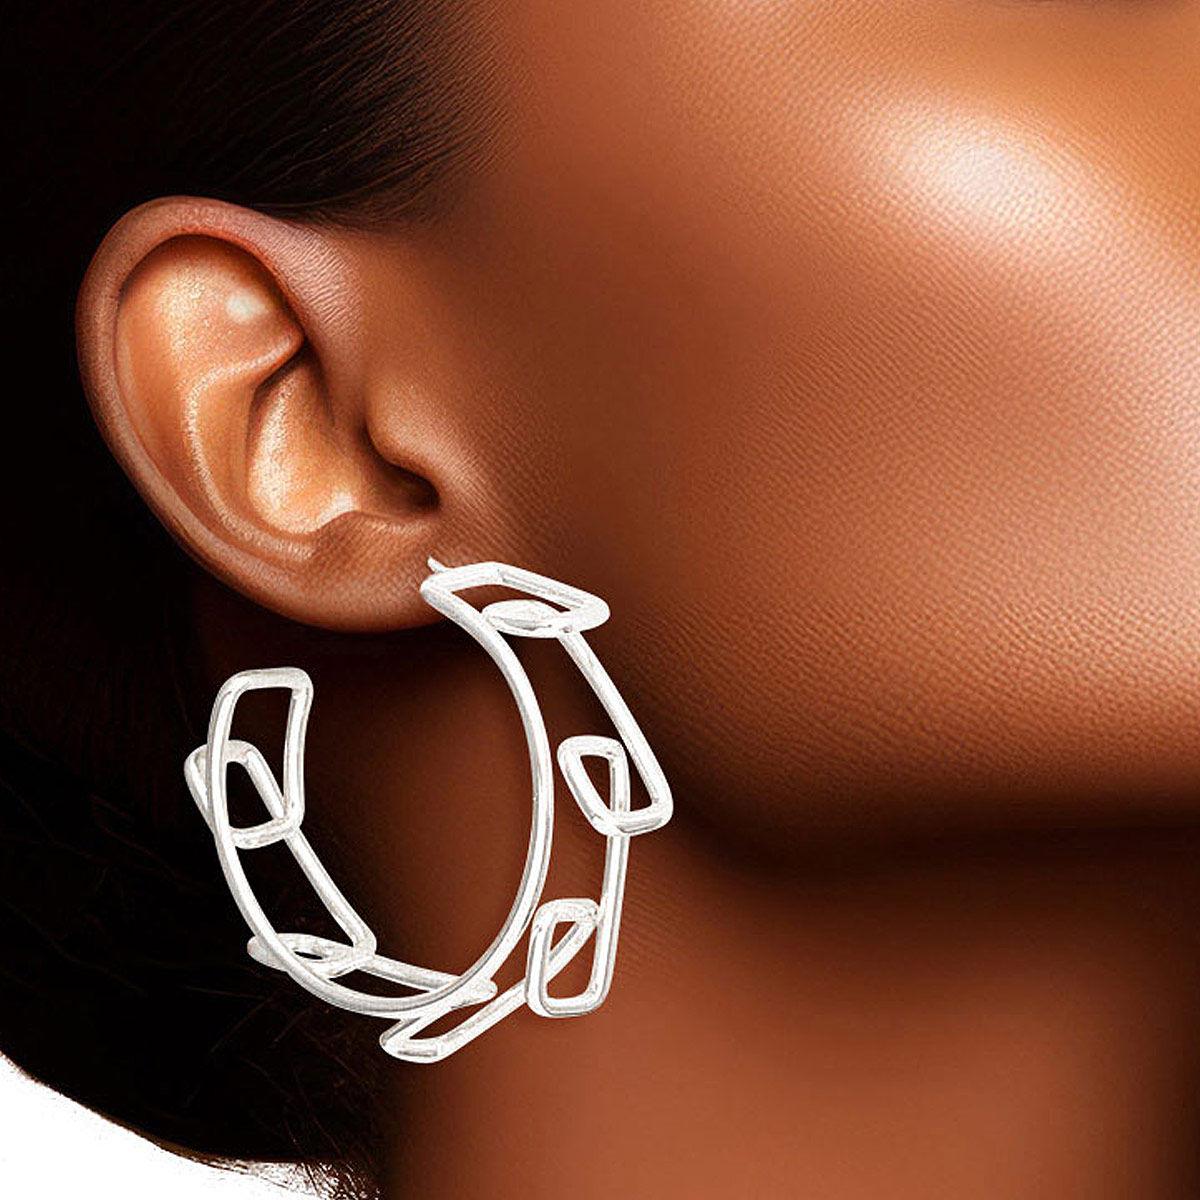 Fashion Jewelry: Upgrade Your Style with Stunning White Gold Geo Wire Hoop Earrings